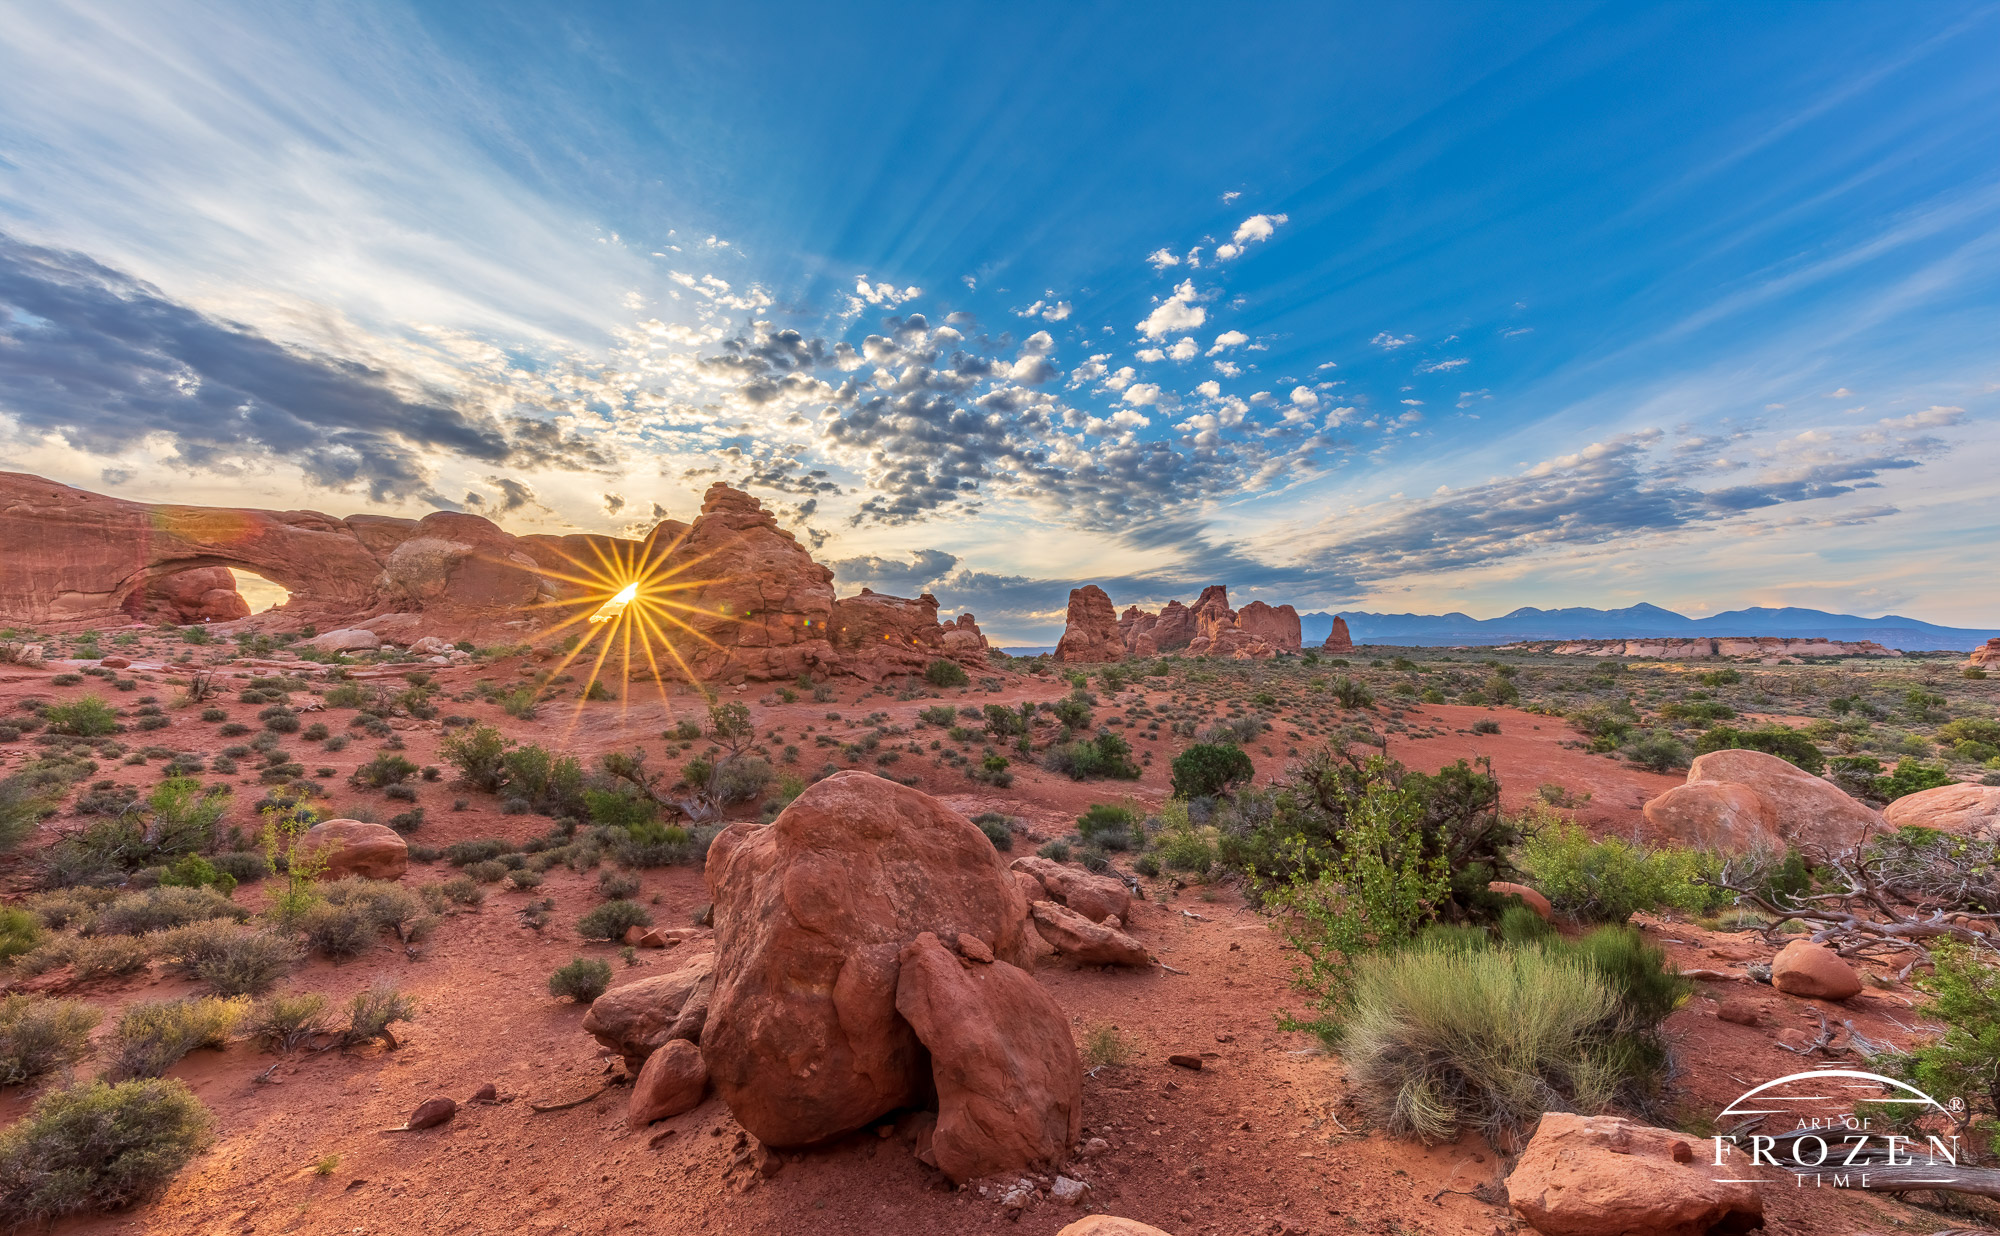 North & South Windows of Arches National Park’s at sunrise where the 2 adjacent formations form a pair of Spectacles